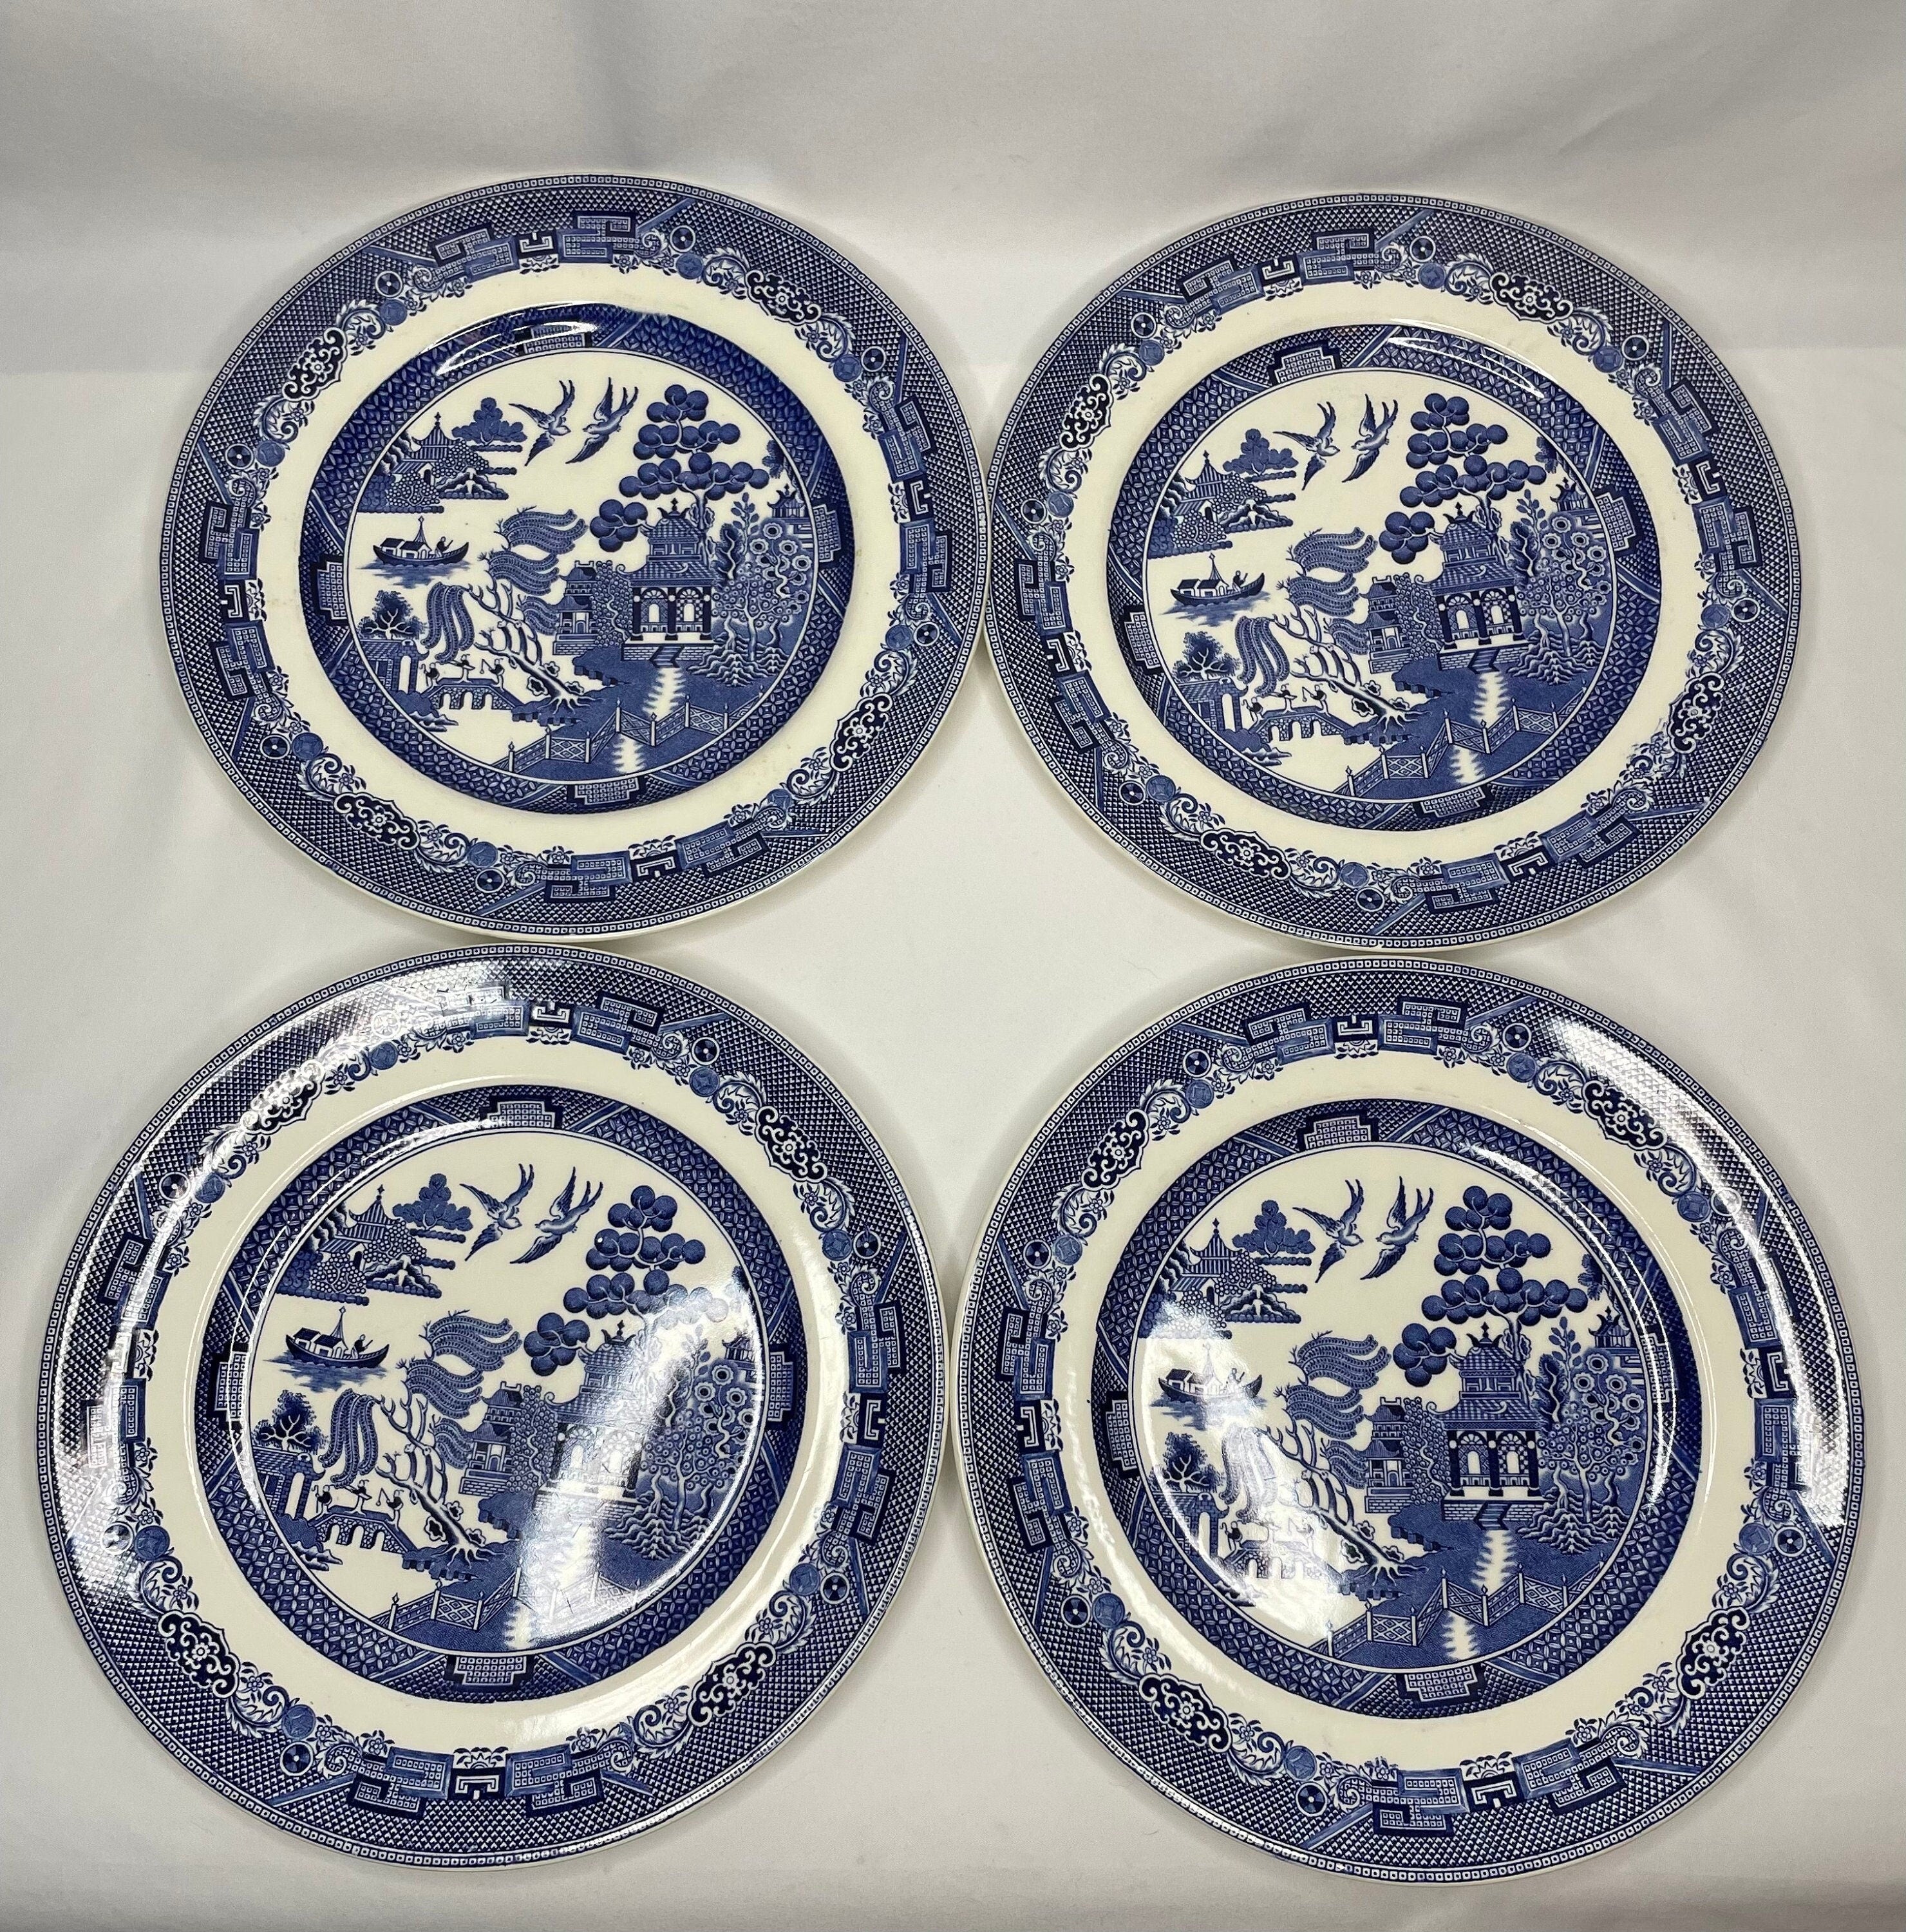 Vintage Churchill China Blue Willow Plates - Set of 3